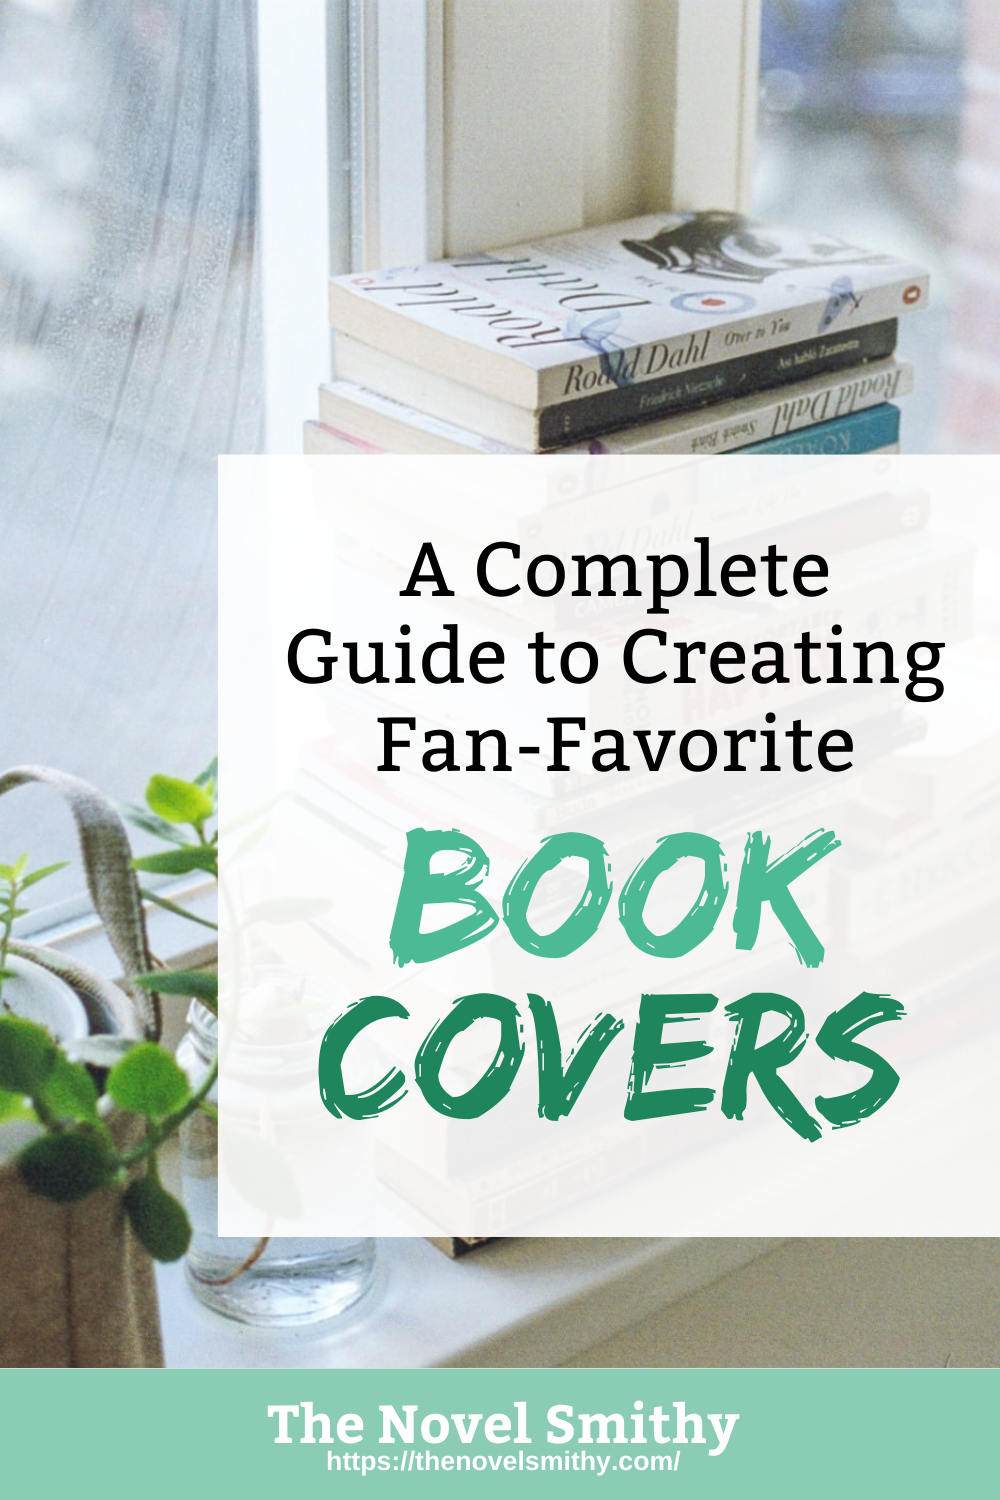 A Complete Guide to Designing Fan-Favorite Book Covers